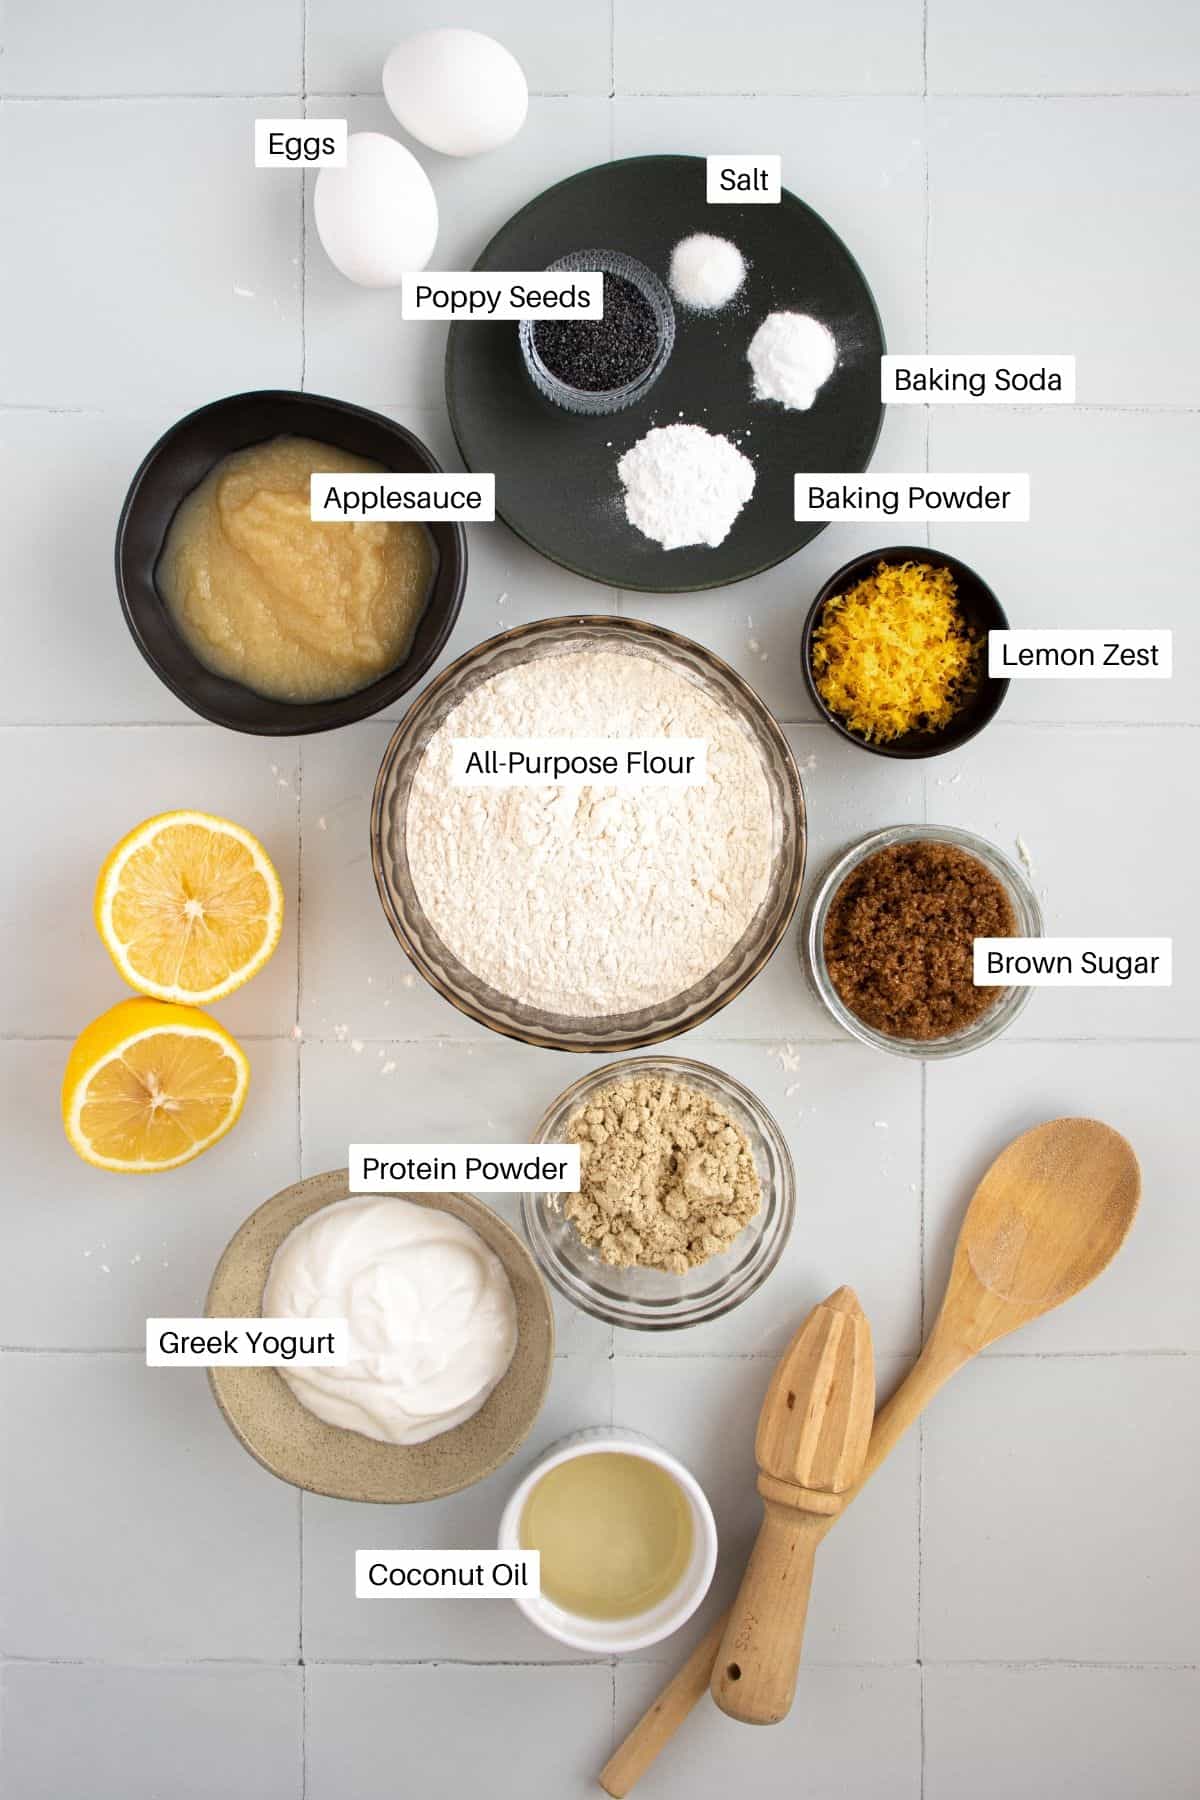 Muffin ingredients including applesauce, lemon zest, and protein powder.